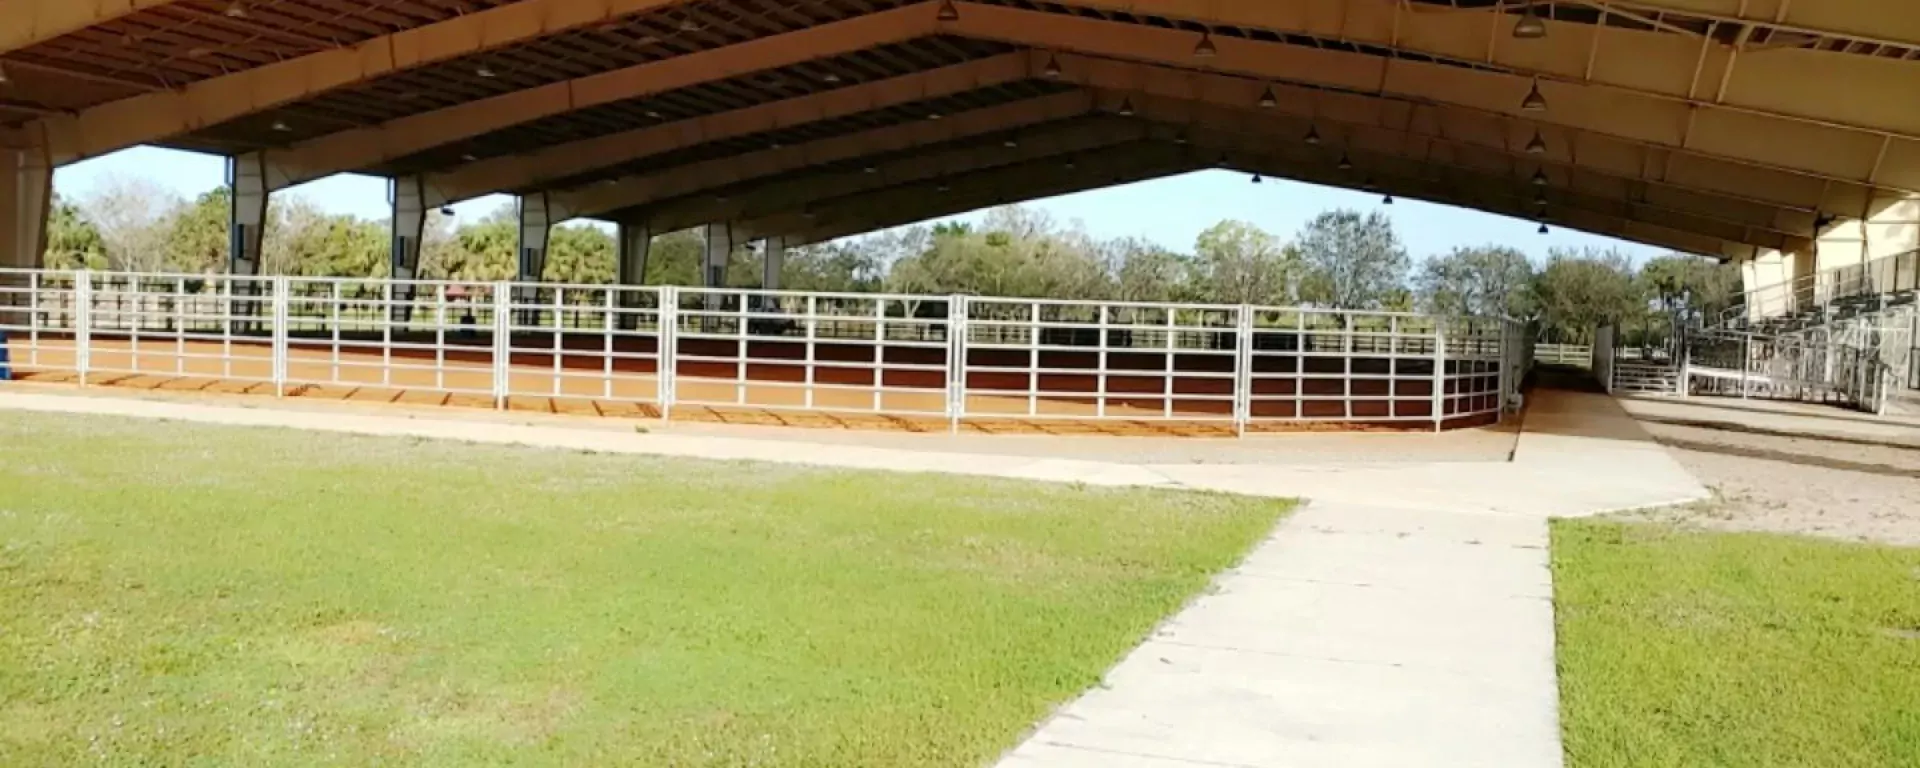 Timer Powers Equestrian Arena